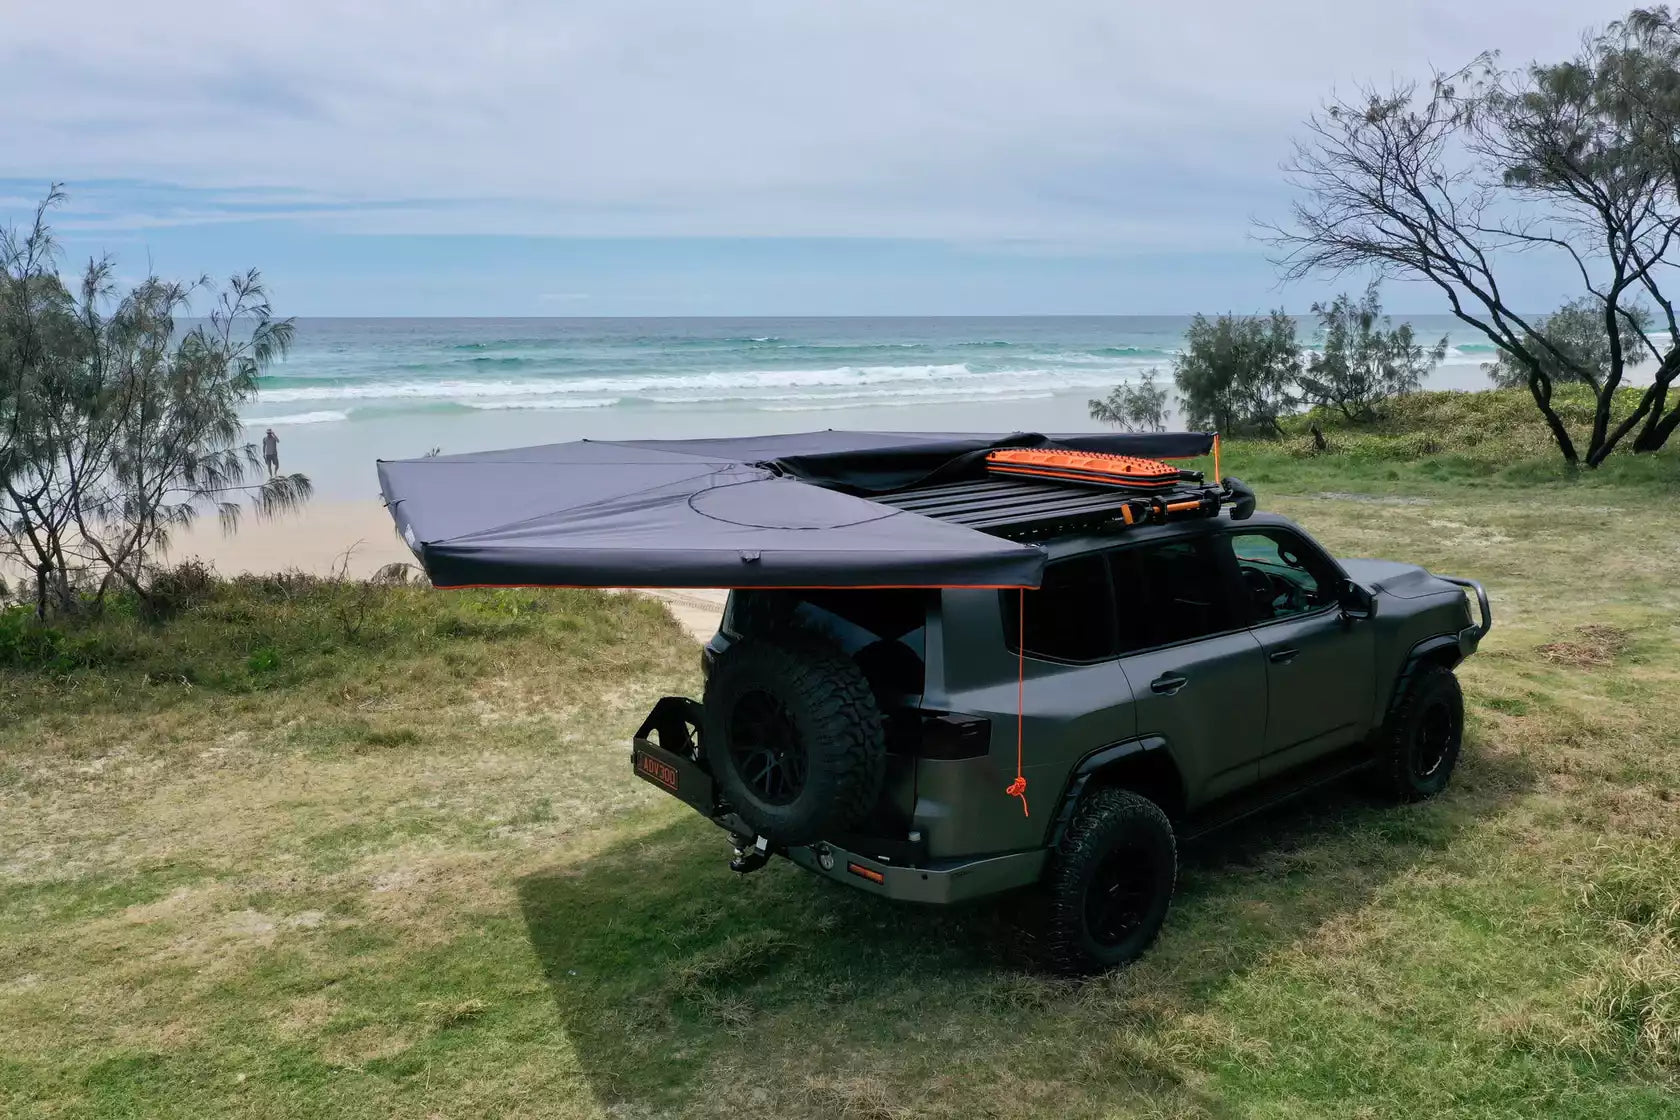 Black and orange circular awning unfolded on the left of a 4x4